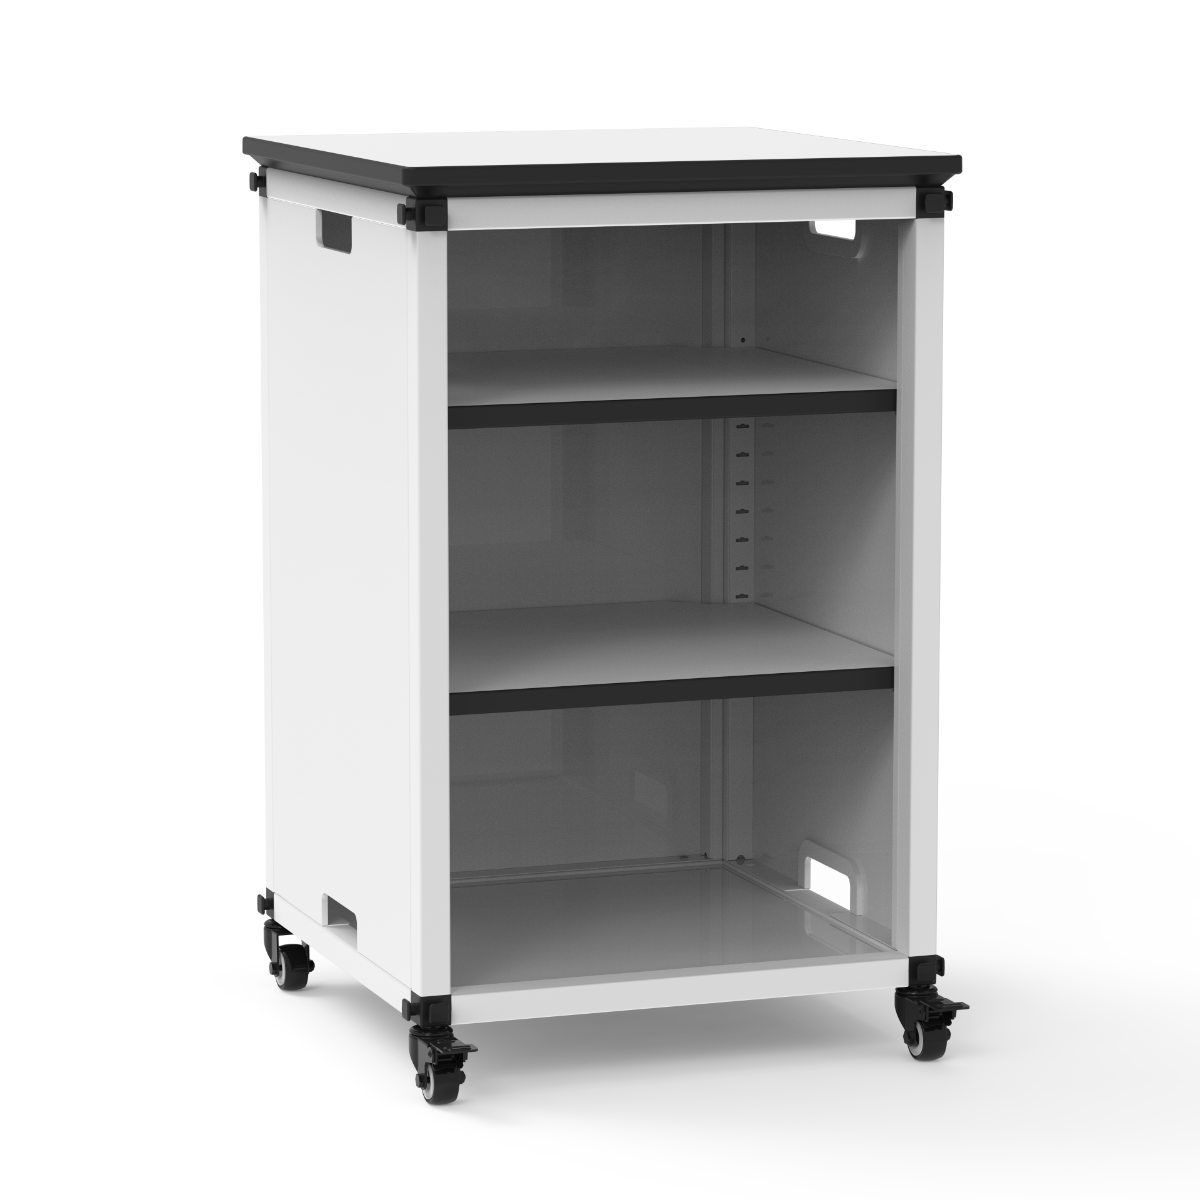 Luxor Modular Classroom Bookshelf - Narrow Module with Casters and Tabletop (LUX-MBSCB01) - SchoolOutlet